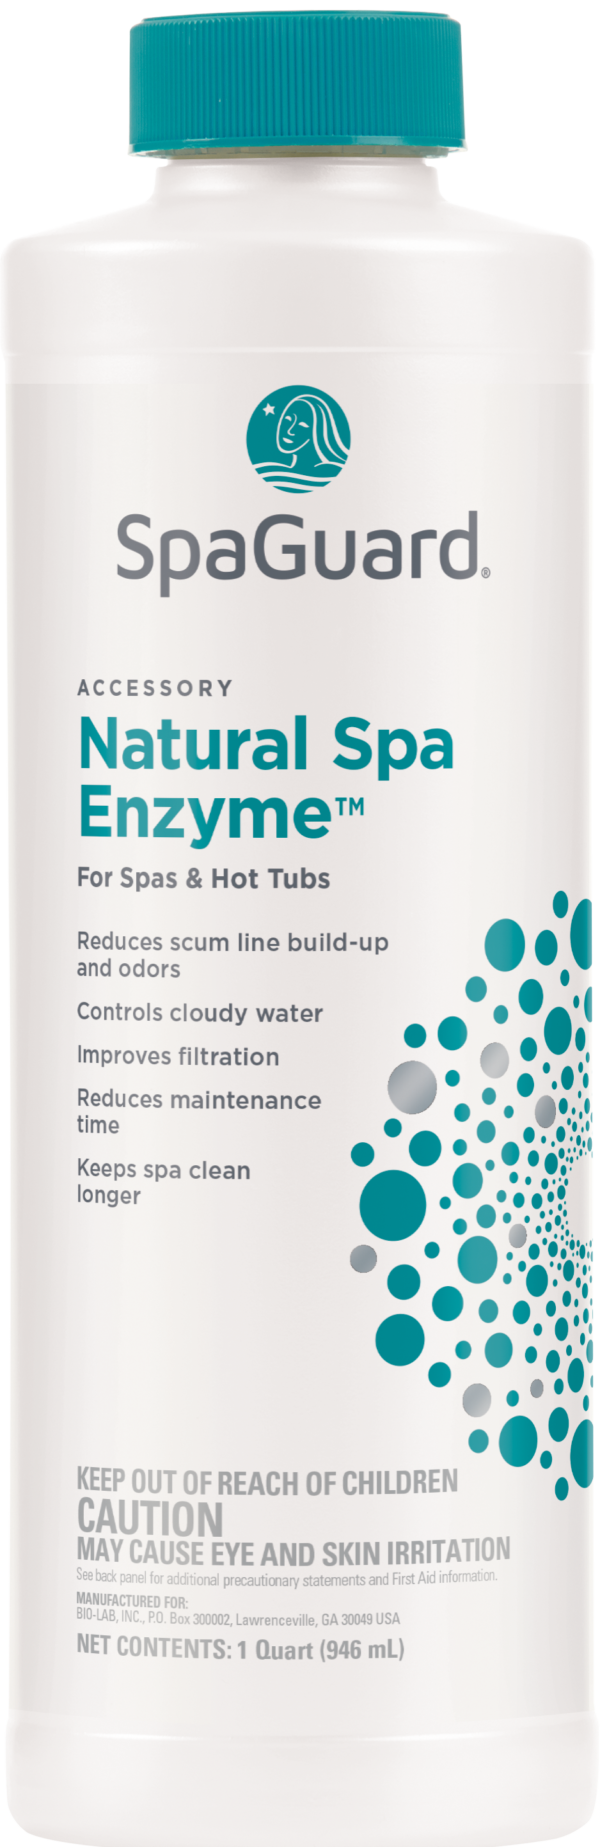 Natural Spa Enzyme